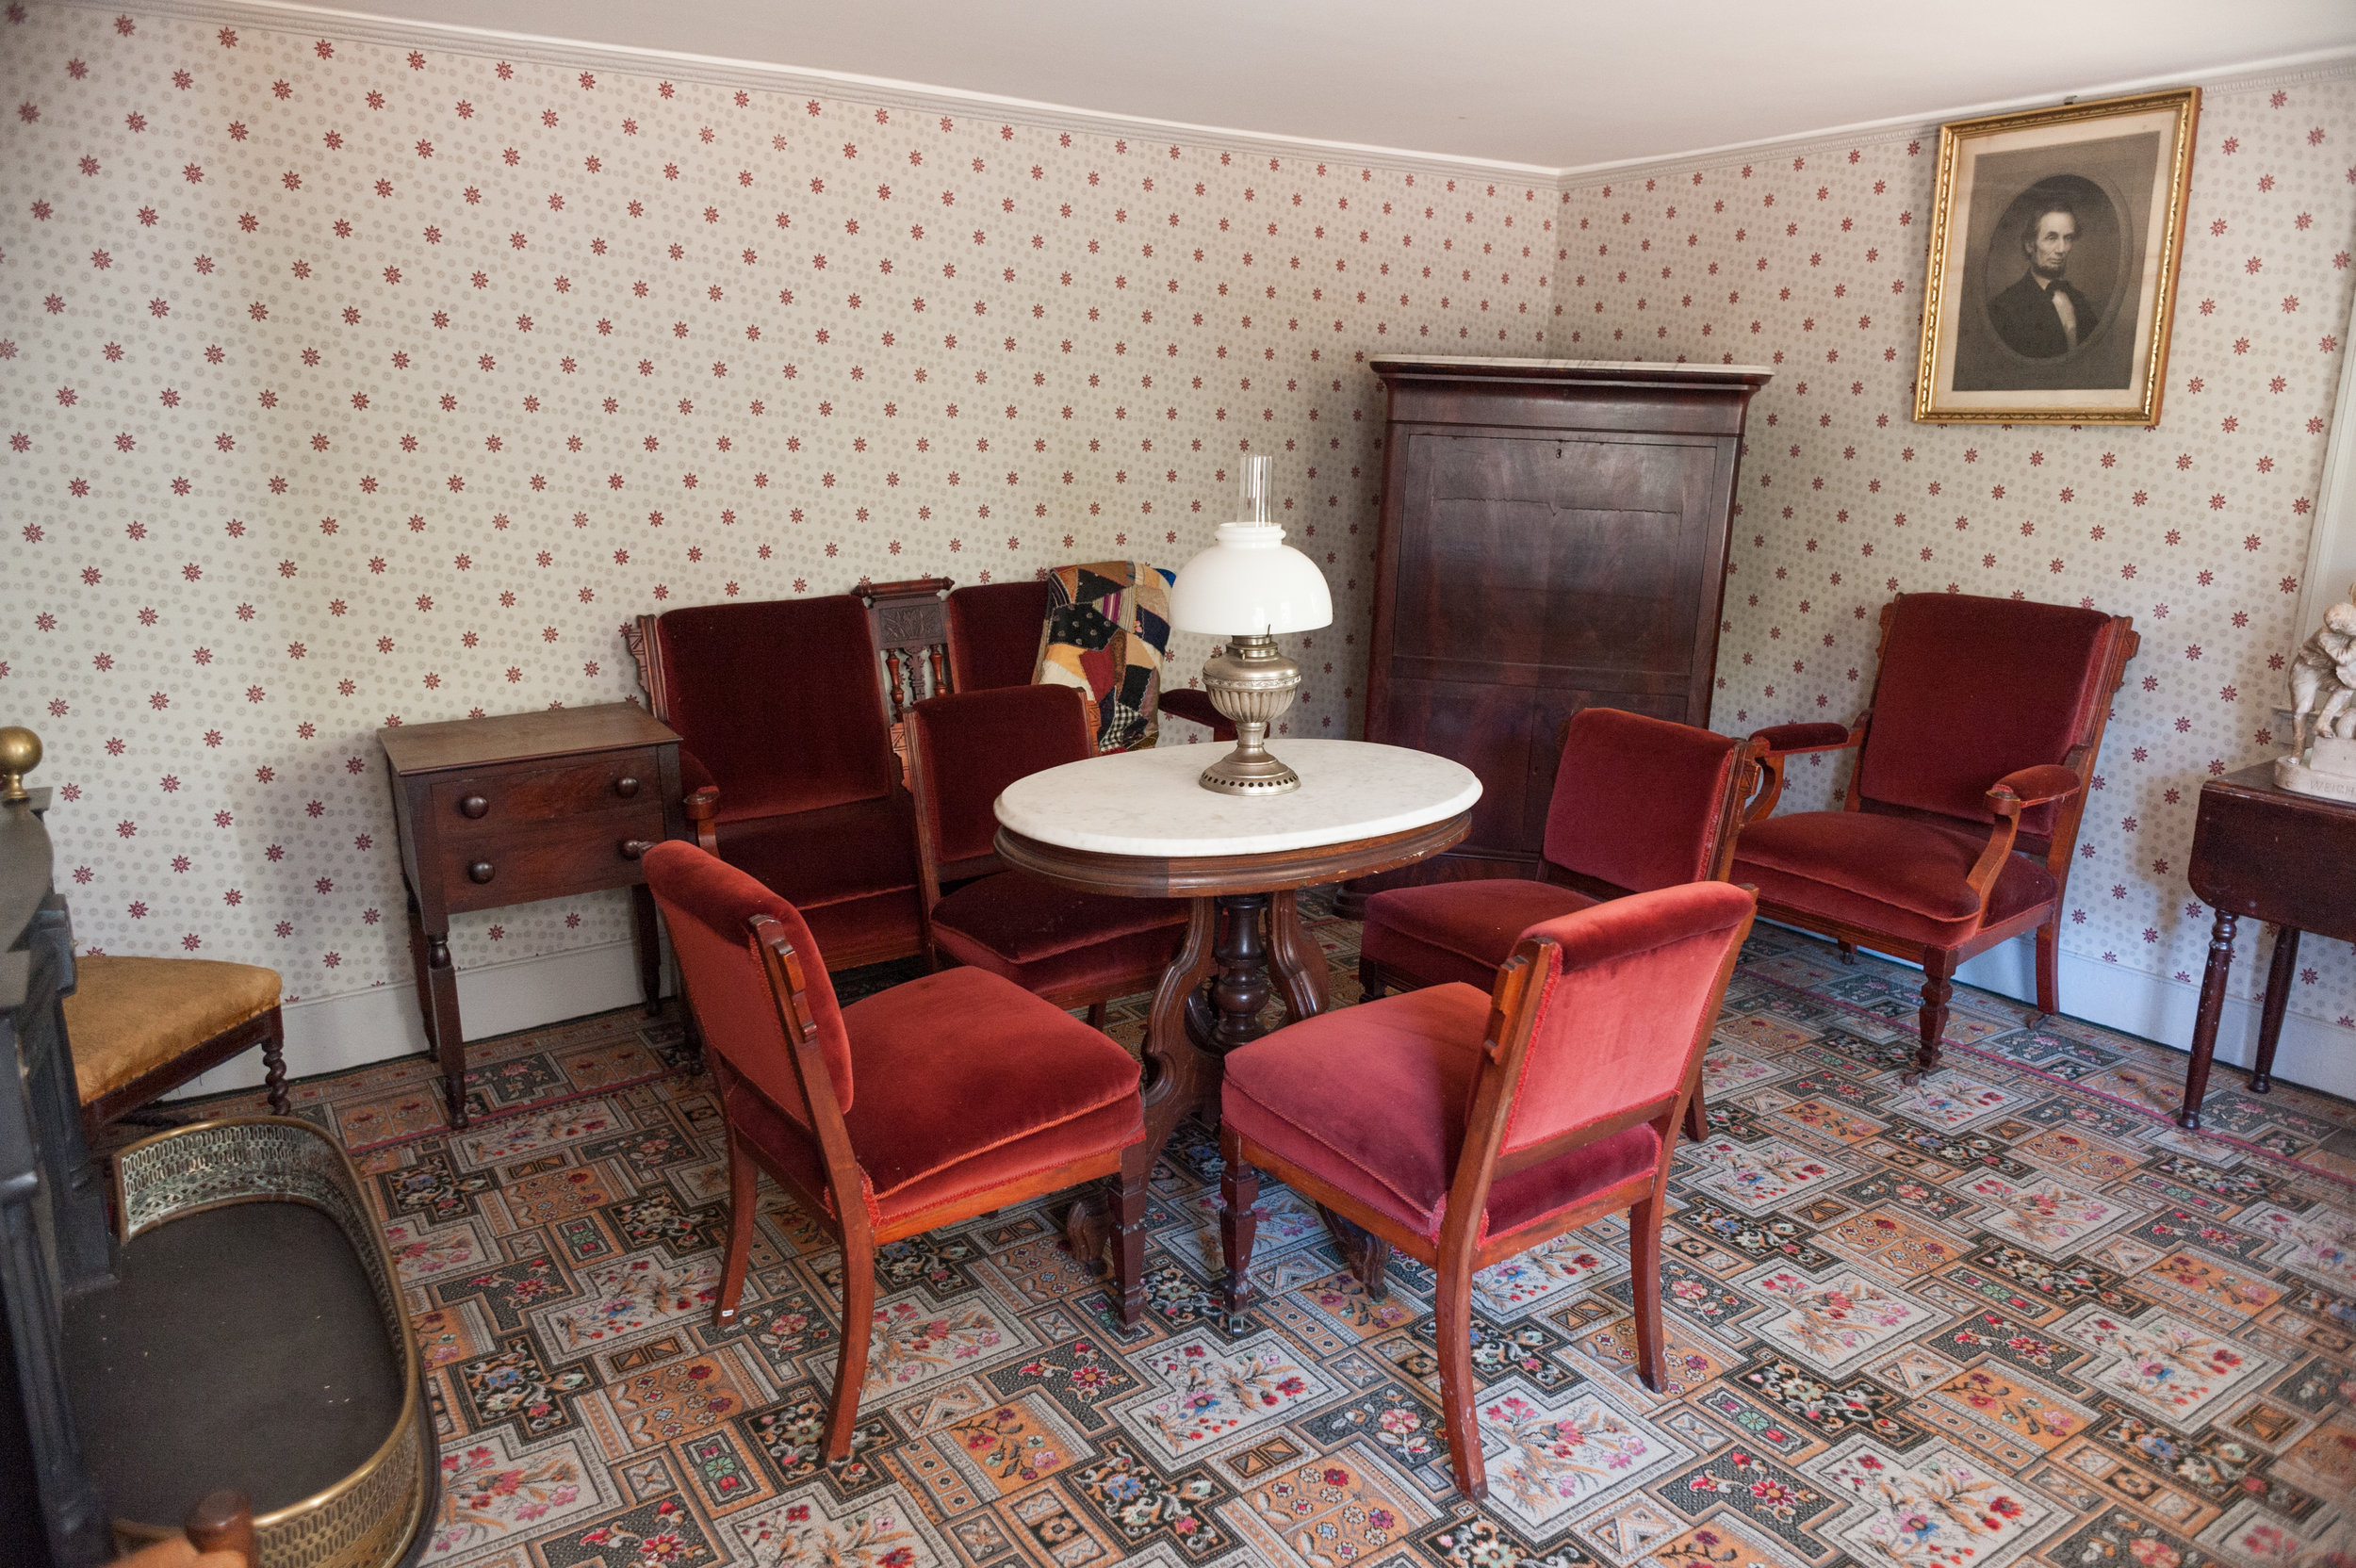 The parlor room was designed with East Lake furniture popular during the Victorian era. (Copy)